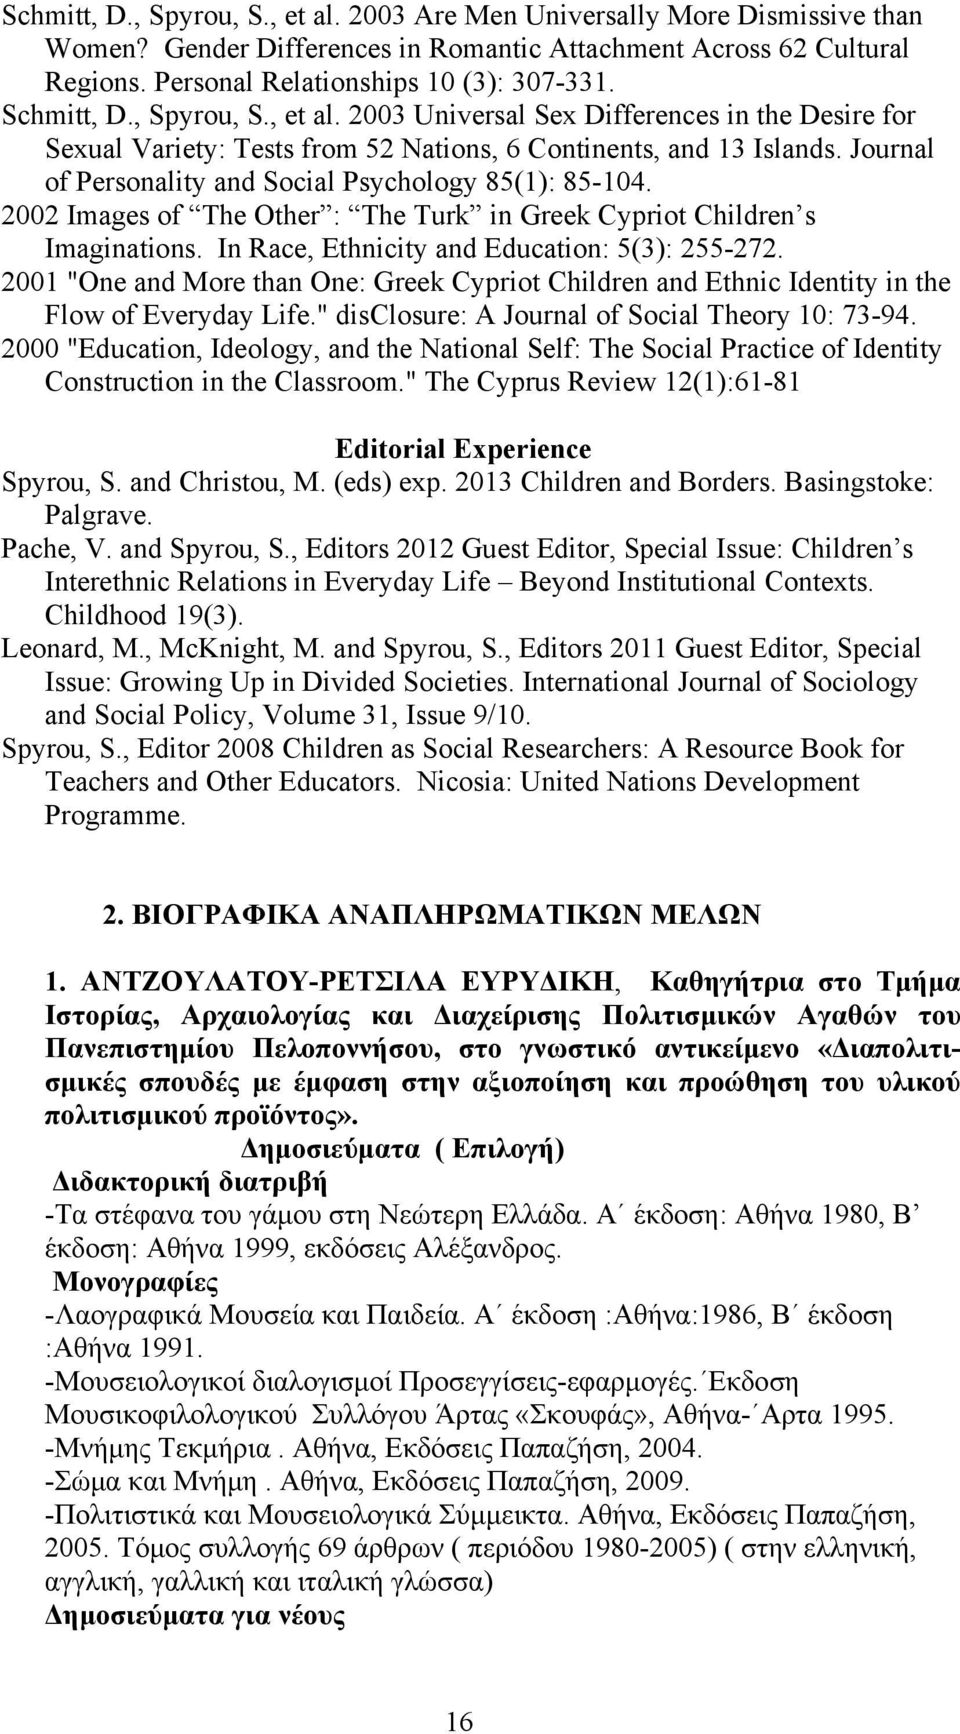 Journal of Personality and Social Psychology 85(1): 85-104. 2002 Images of The Other : The Turk in Greek Cypriot Children s Imaginations. In Race, Ethnicity and Education: 5(3): 255-272.